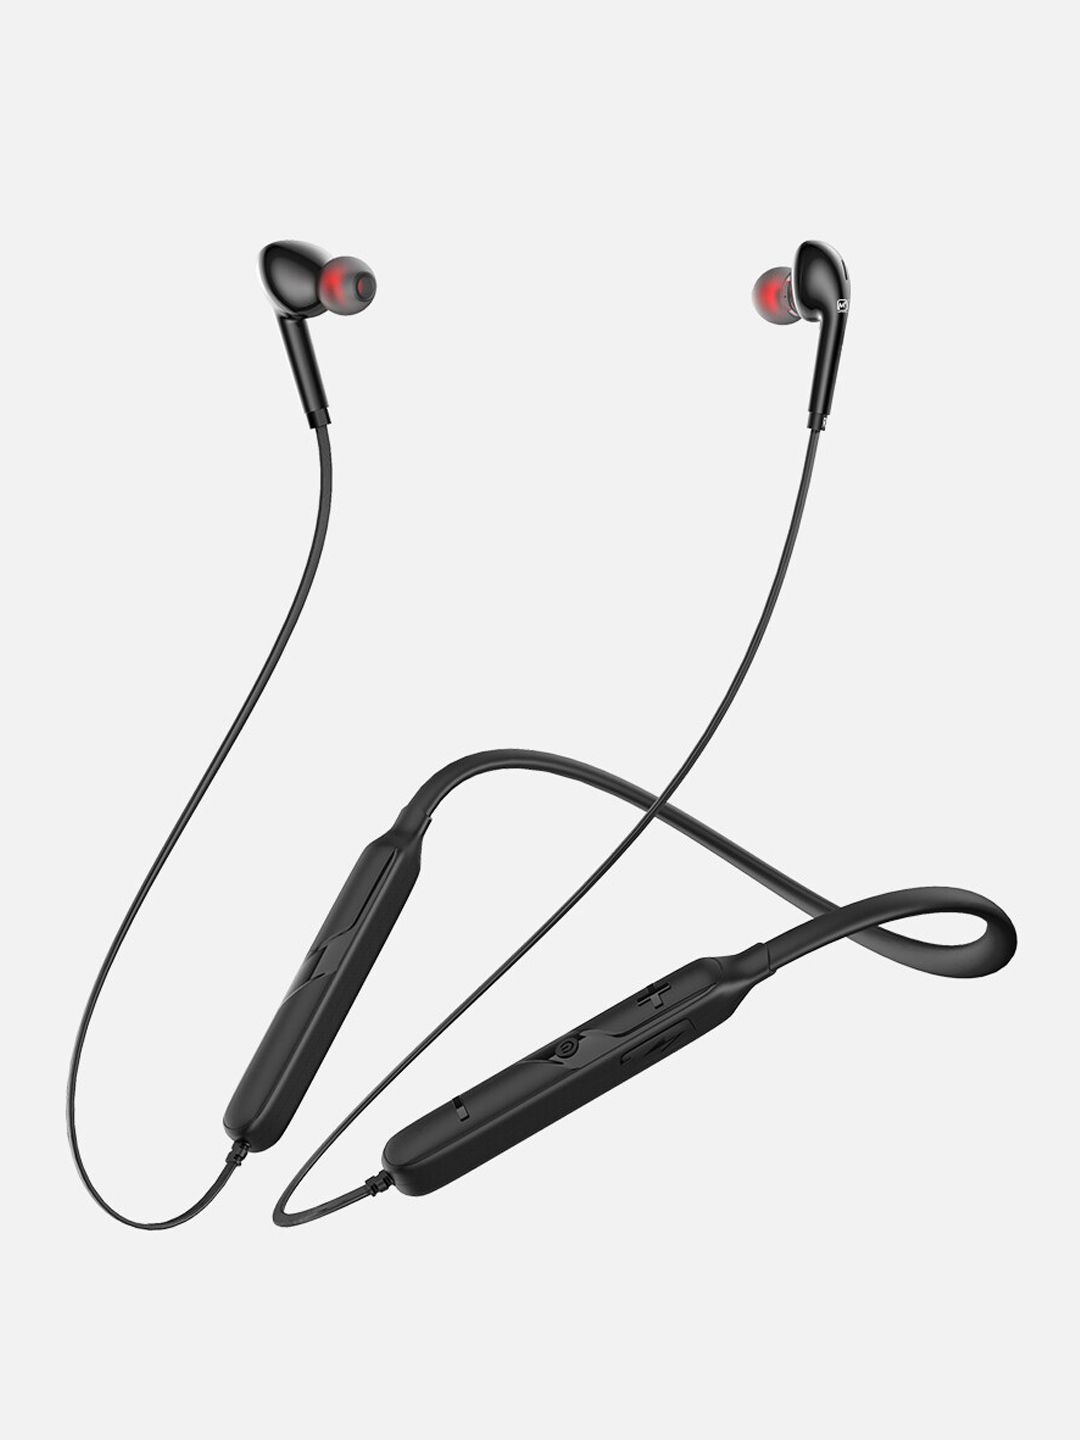 MATATA Black Solid MTEBGP3 In-ear Sports Neckband Headphones Price in India